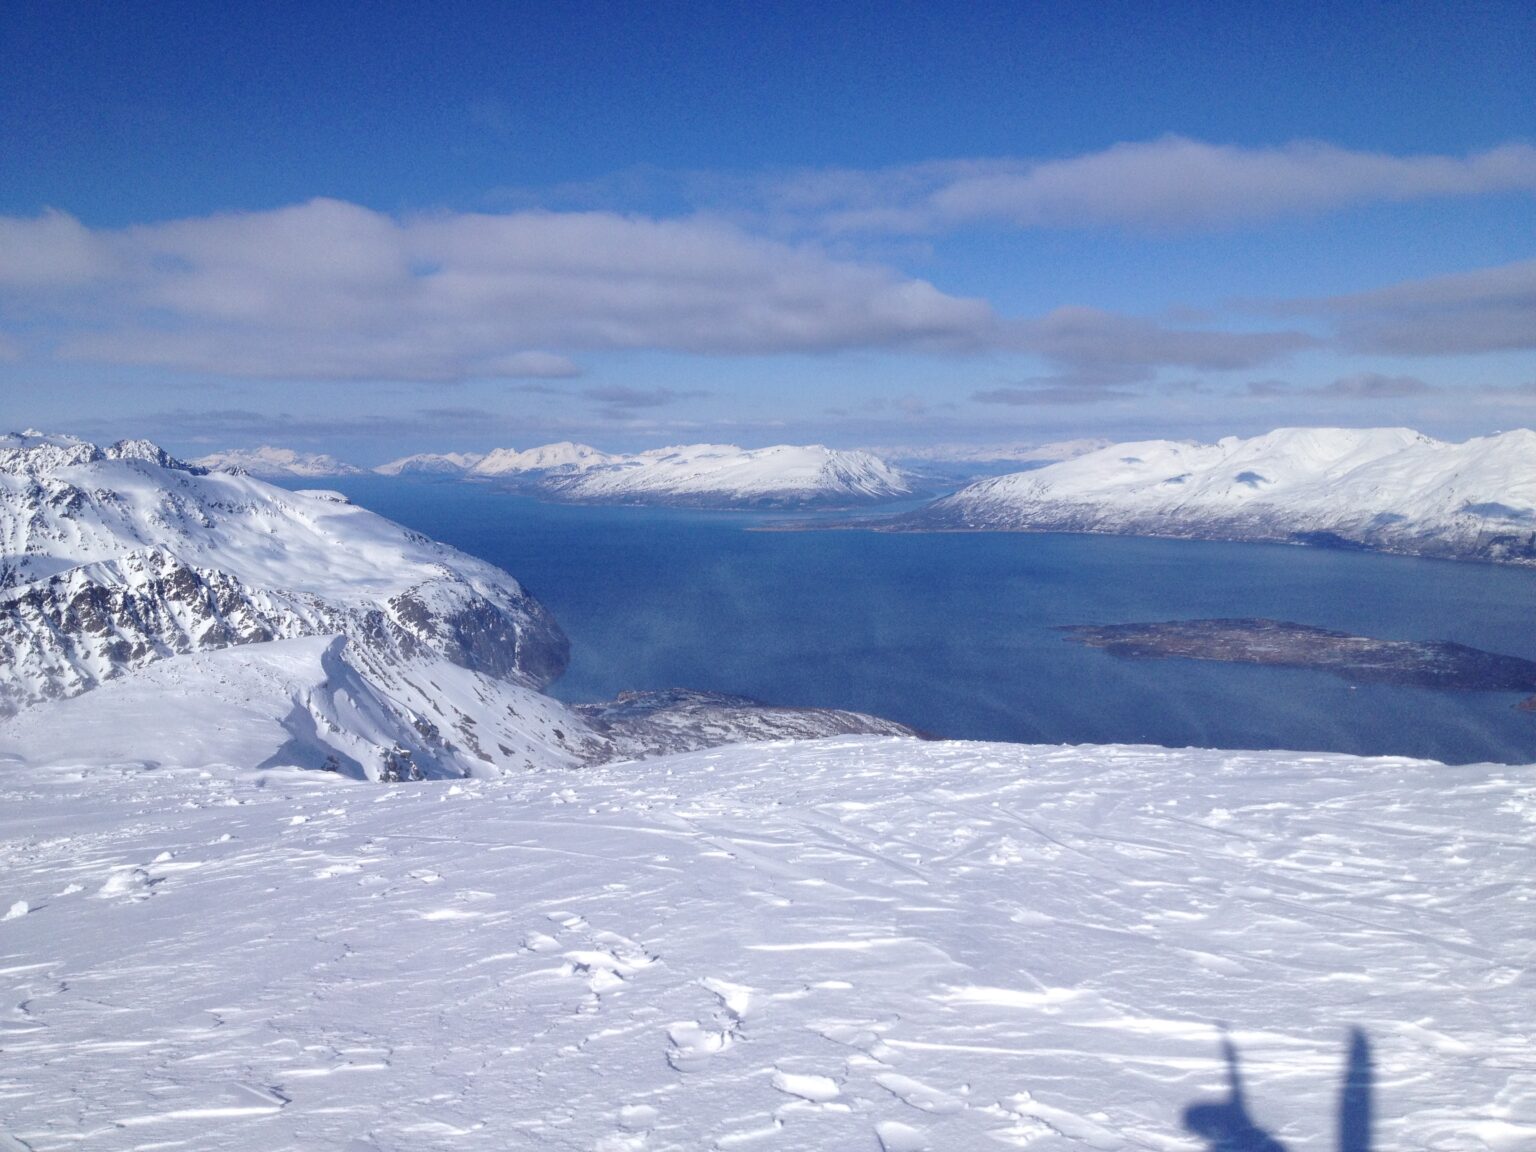 Looking into the Lyngenfjord from the summit of Fastdaltinden